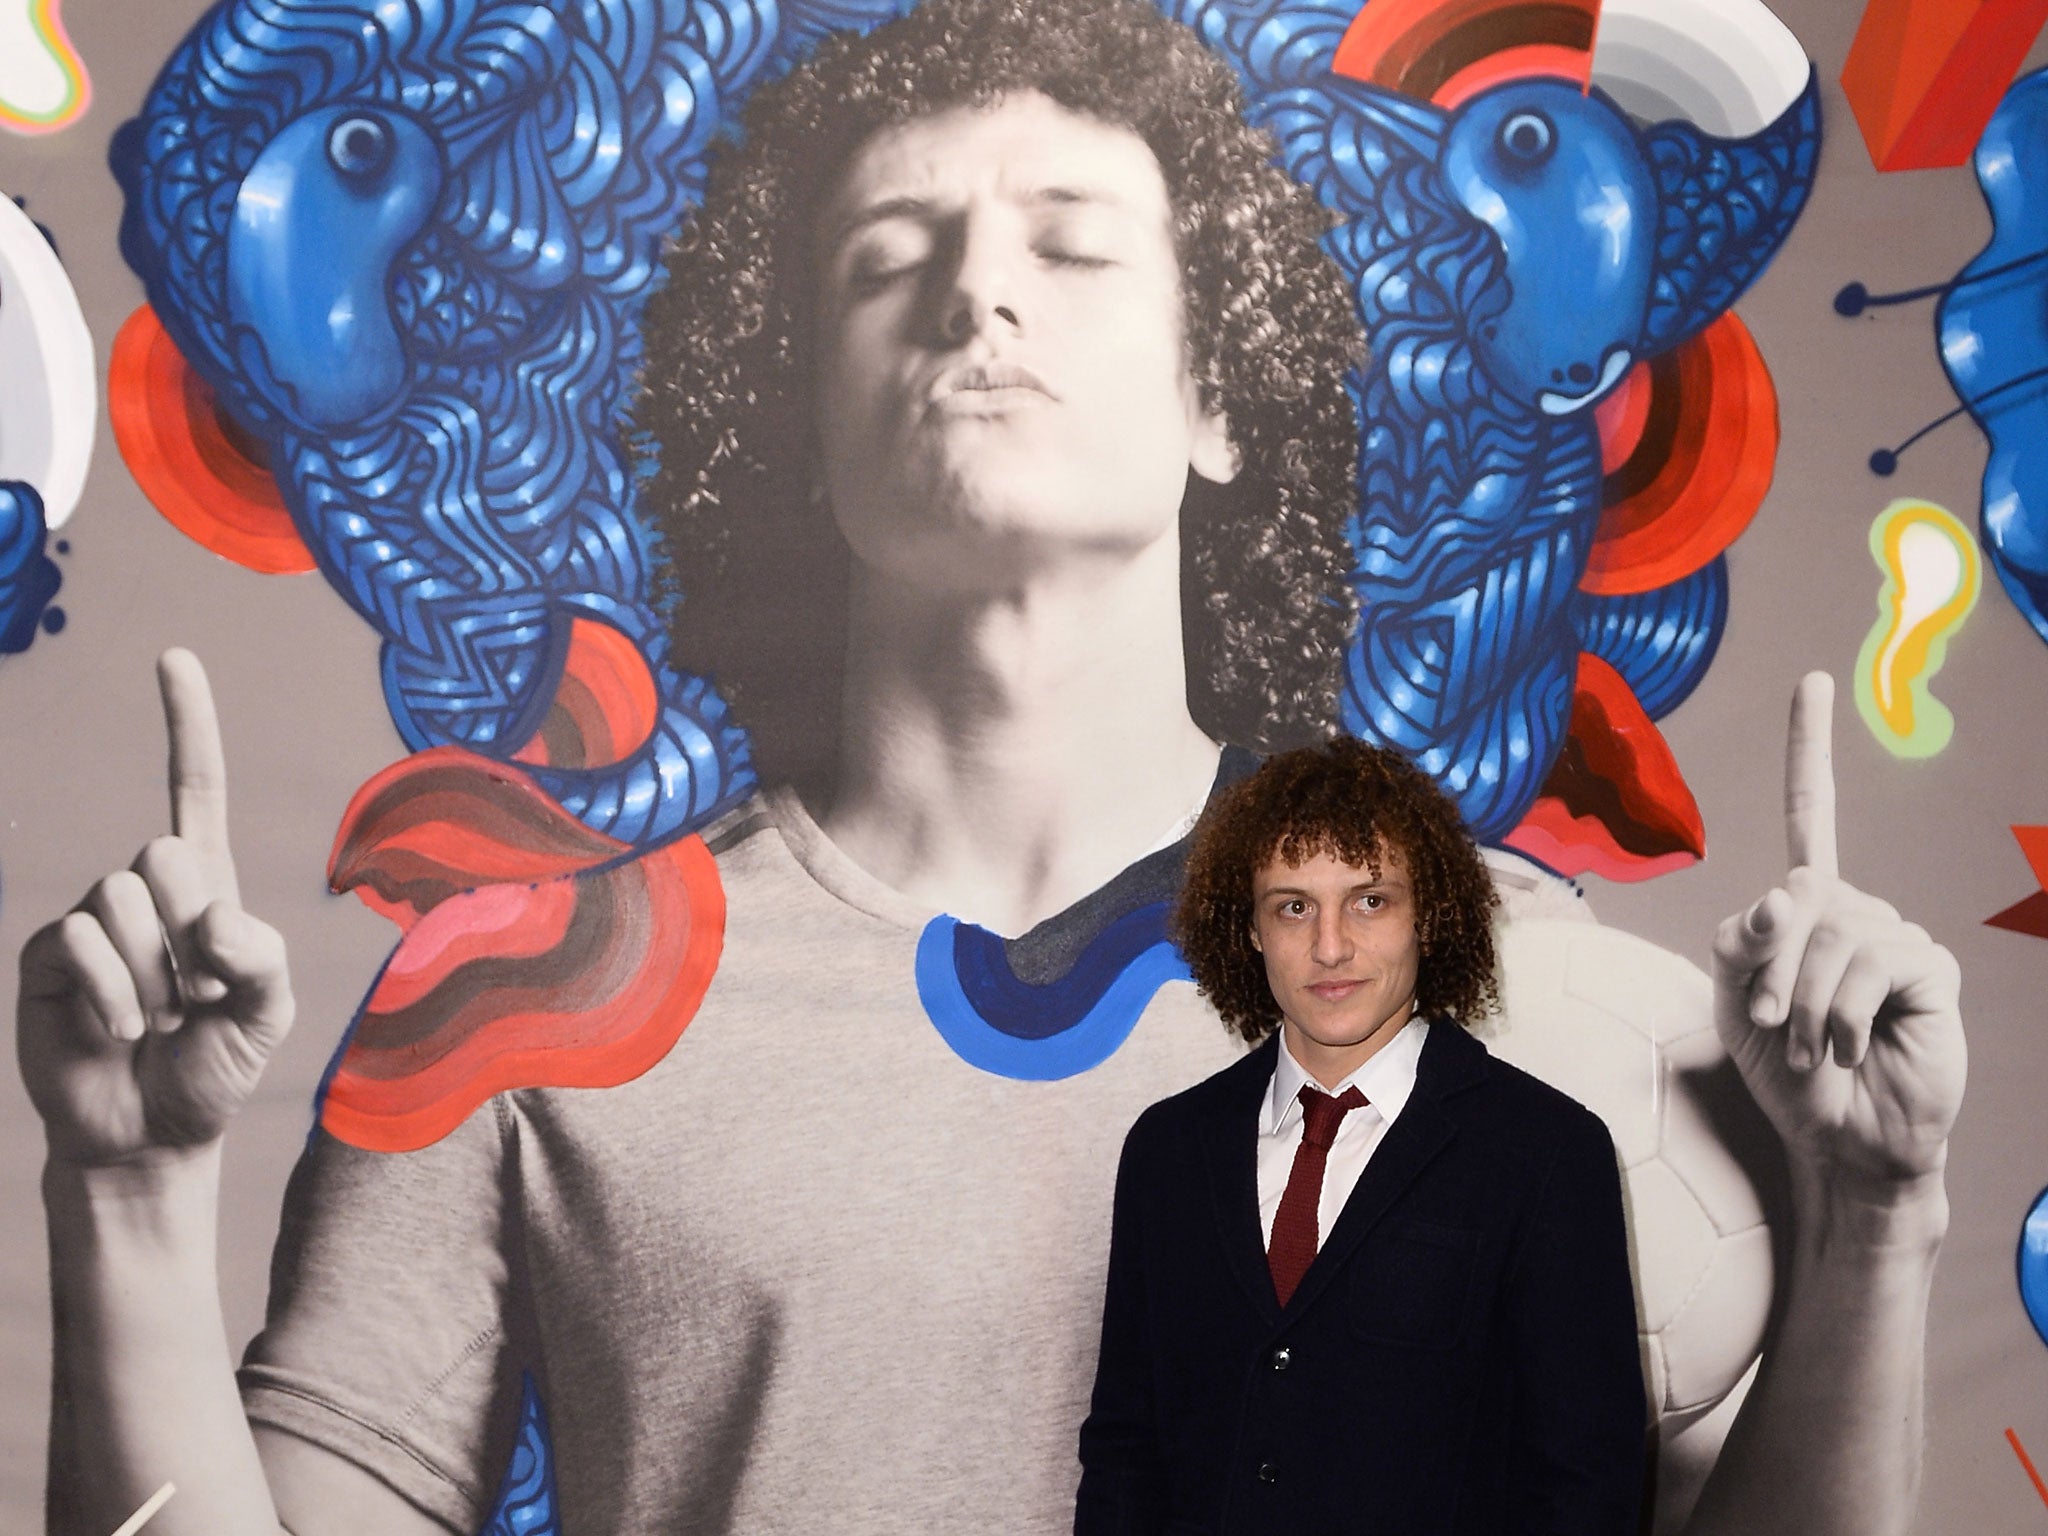 David Luiz at an event organised by Pepsi to celebrate Brazilian artist Ricardo AKN, who was one of the six street artists commissioned by PepsiMax as part of the brand's "The Art of Football" collection